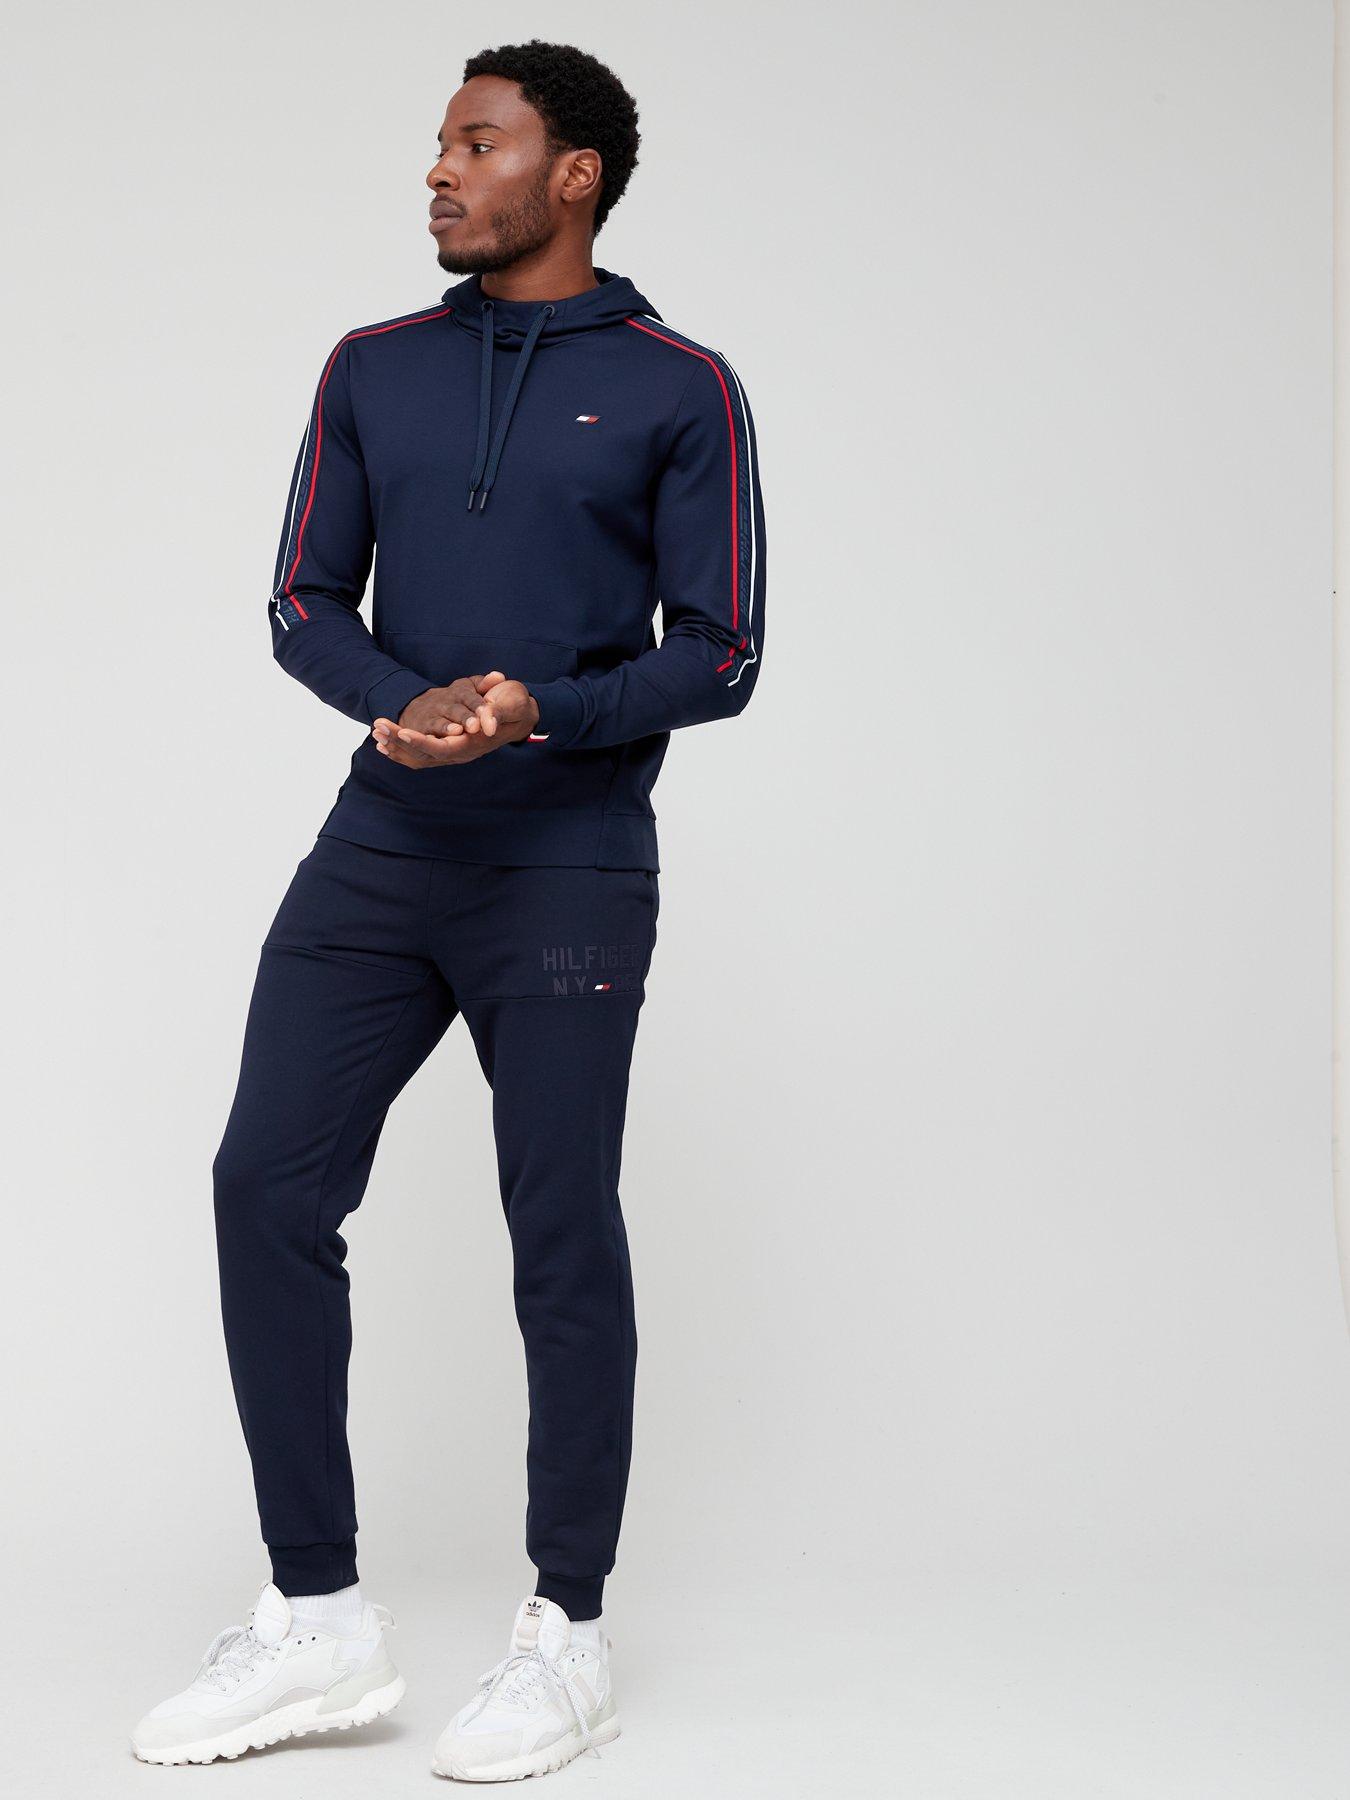 Tommy Hilfiger hurdles into activewear with TOMMY SPORT - ICON